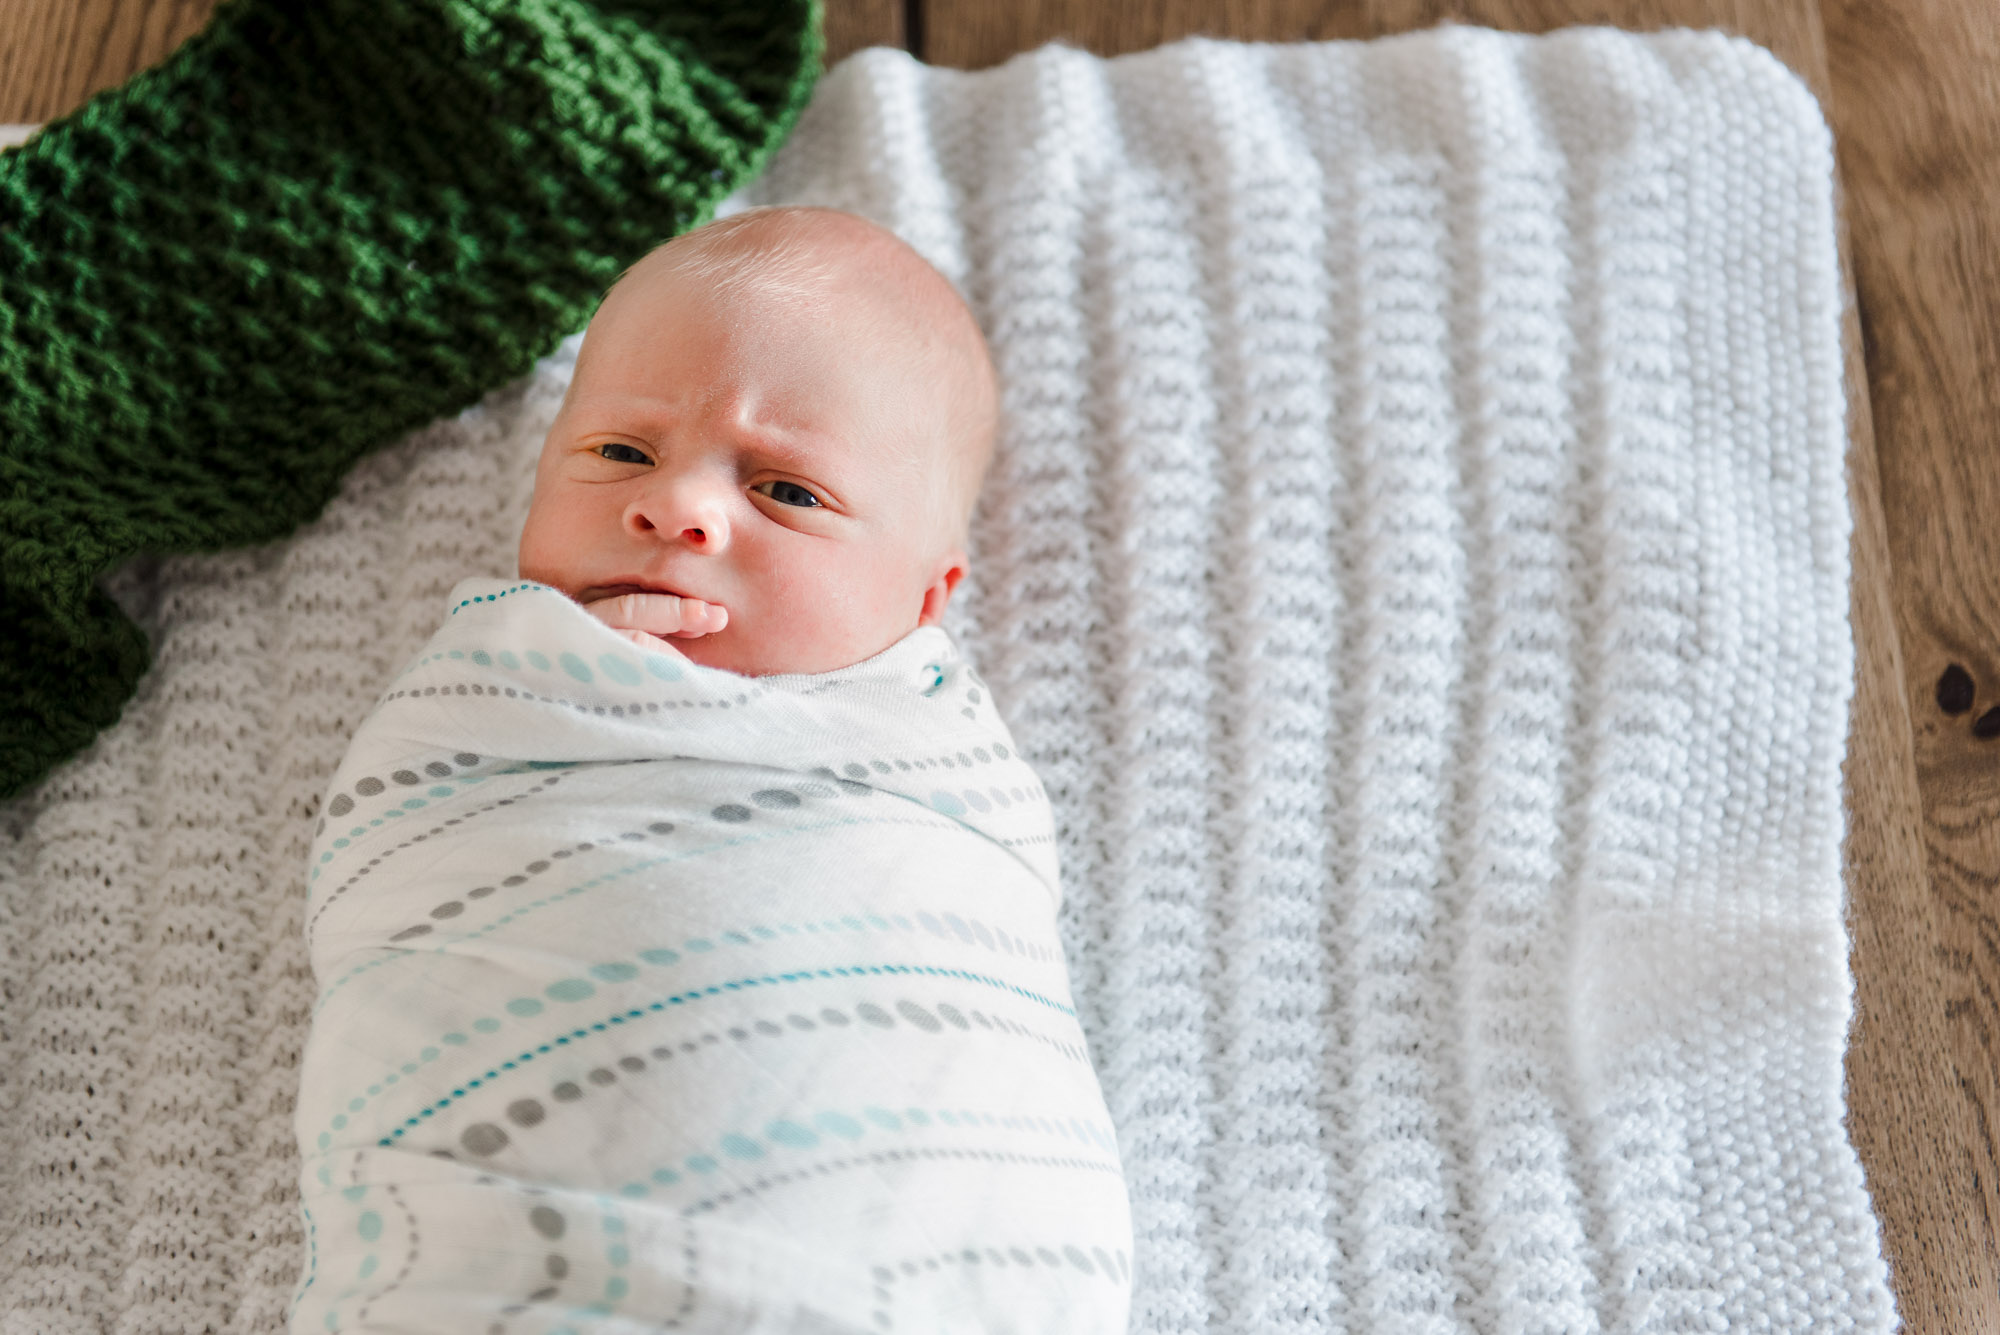 A portrait of a newborn baby on a vintage blanket